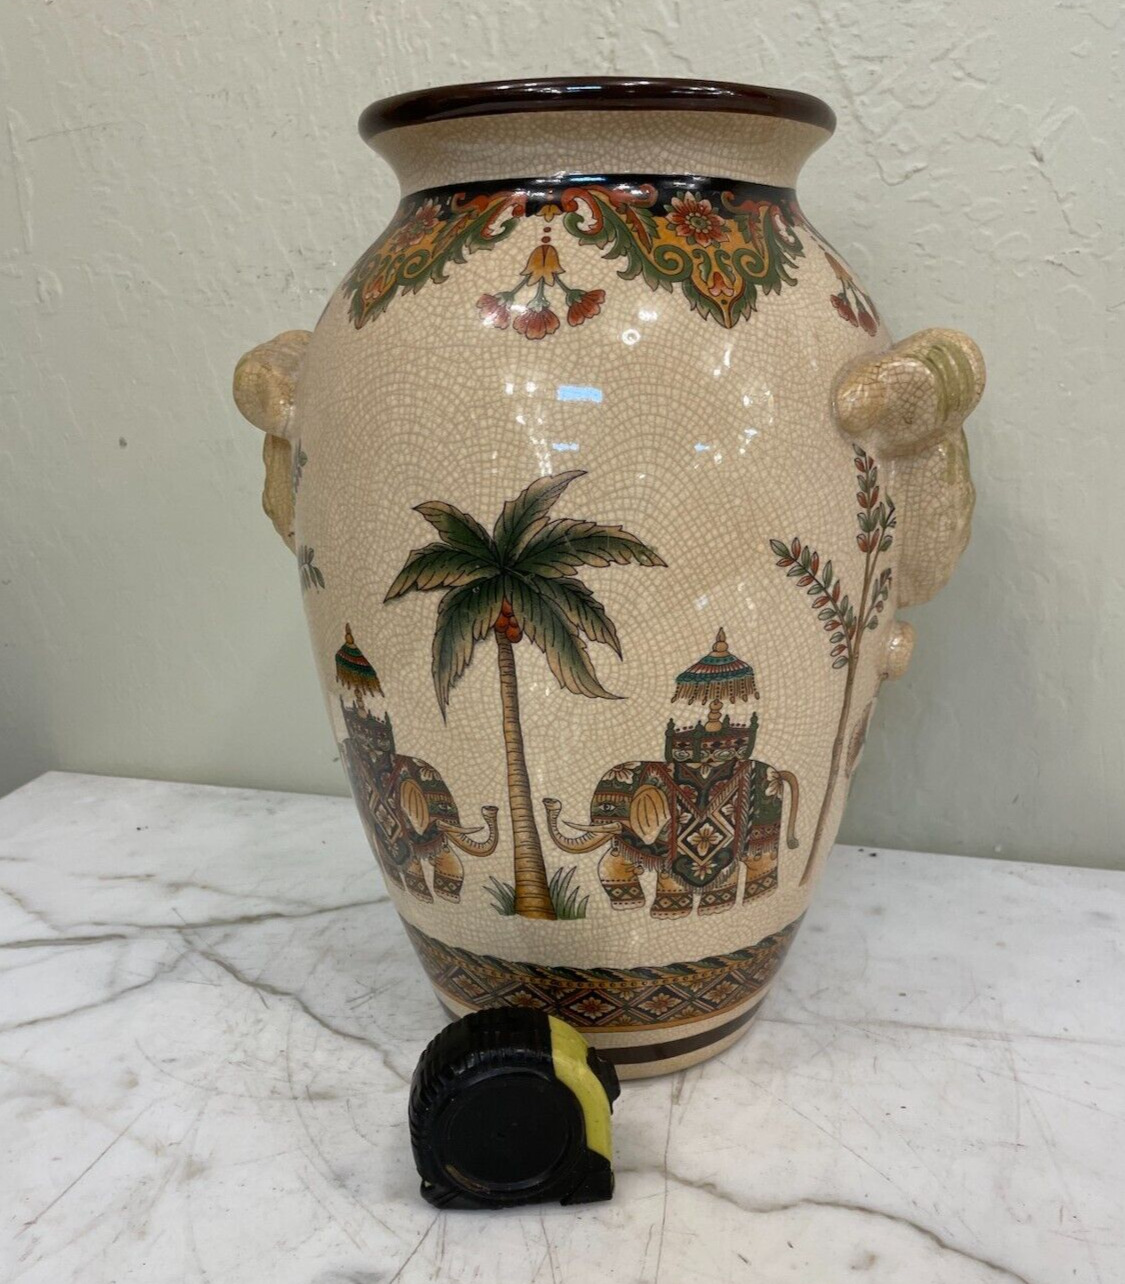 Unique Porcelain Vase with Hand-Painted Scenery with Elephant